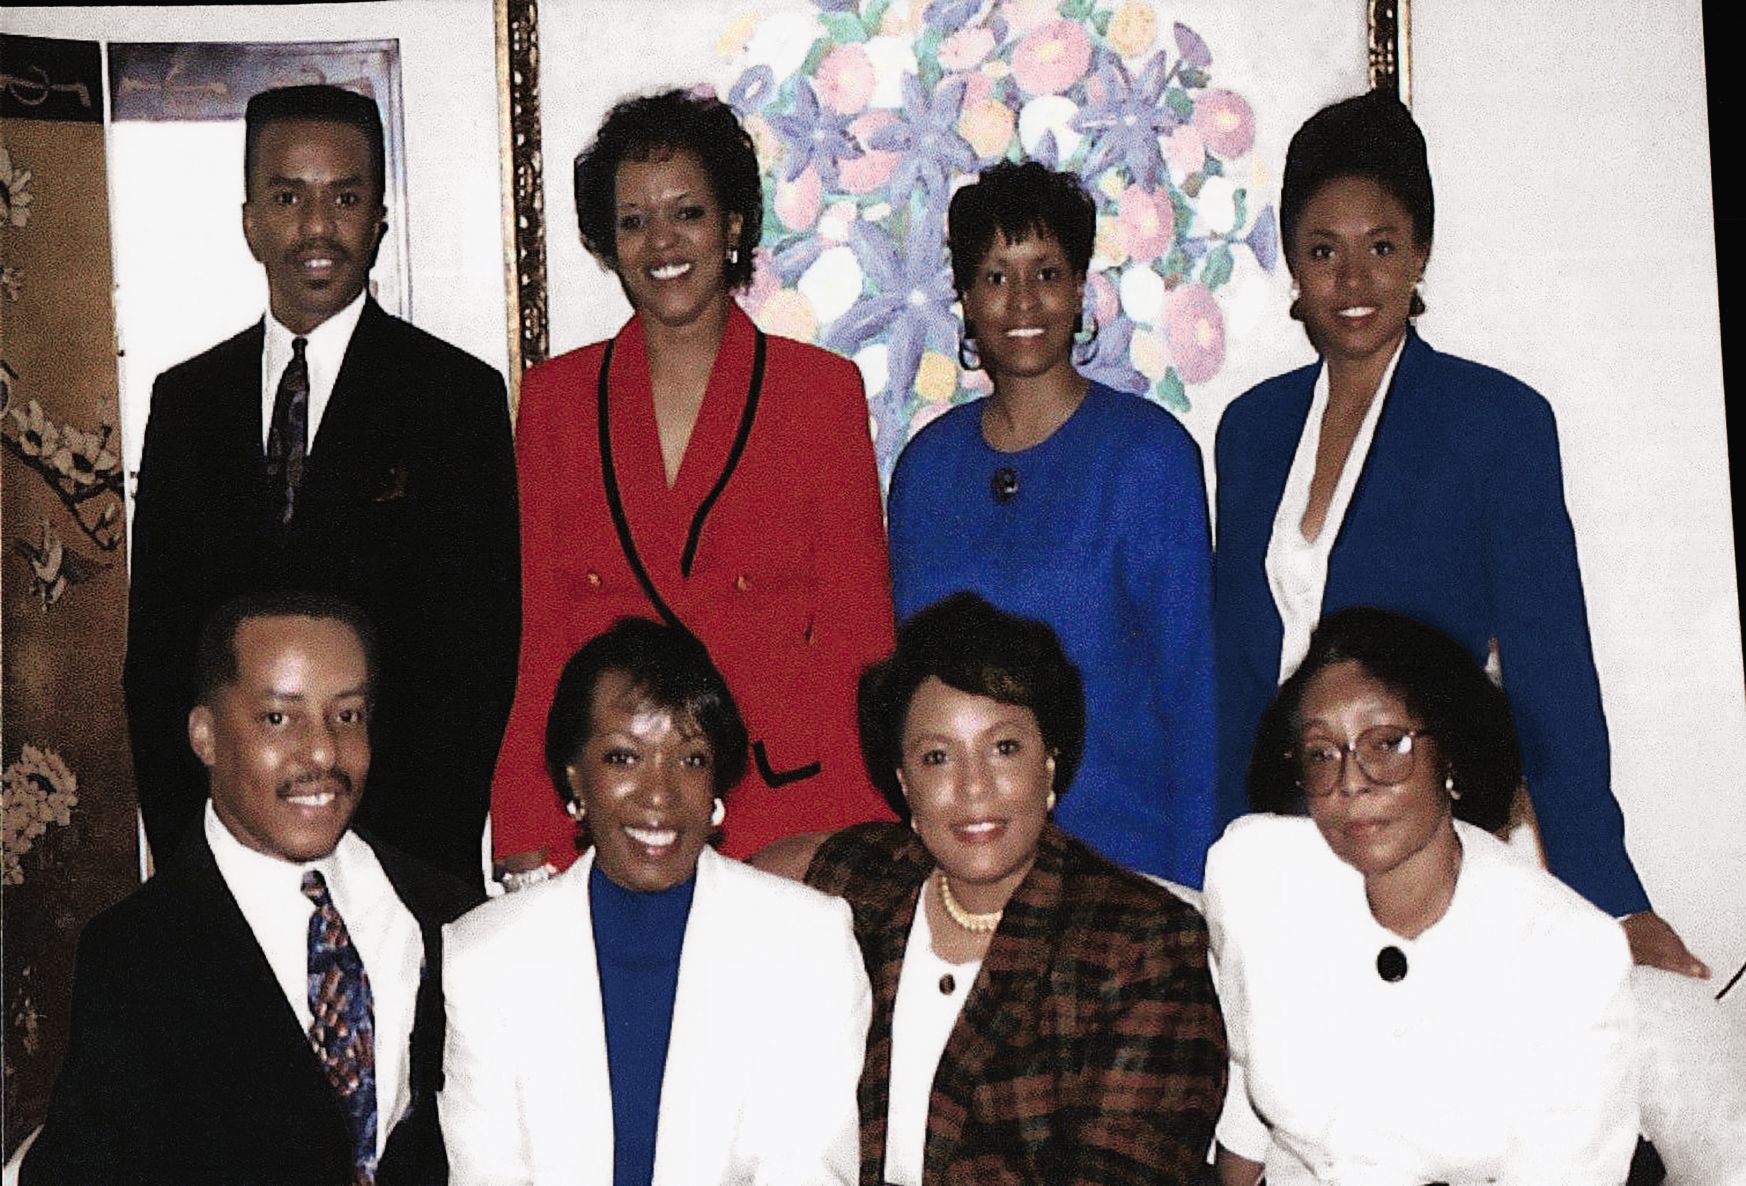 The Mother of Black Hollywood by Jenifer Lewis